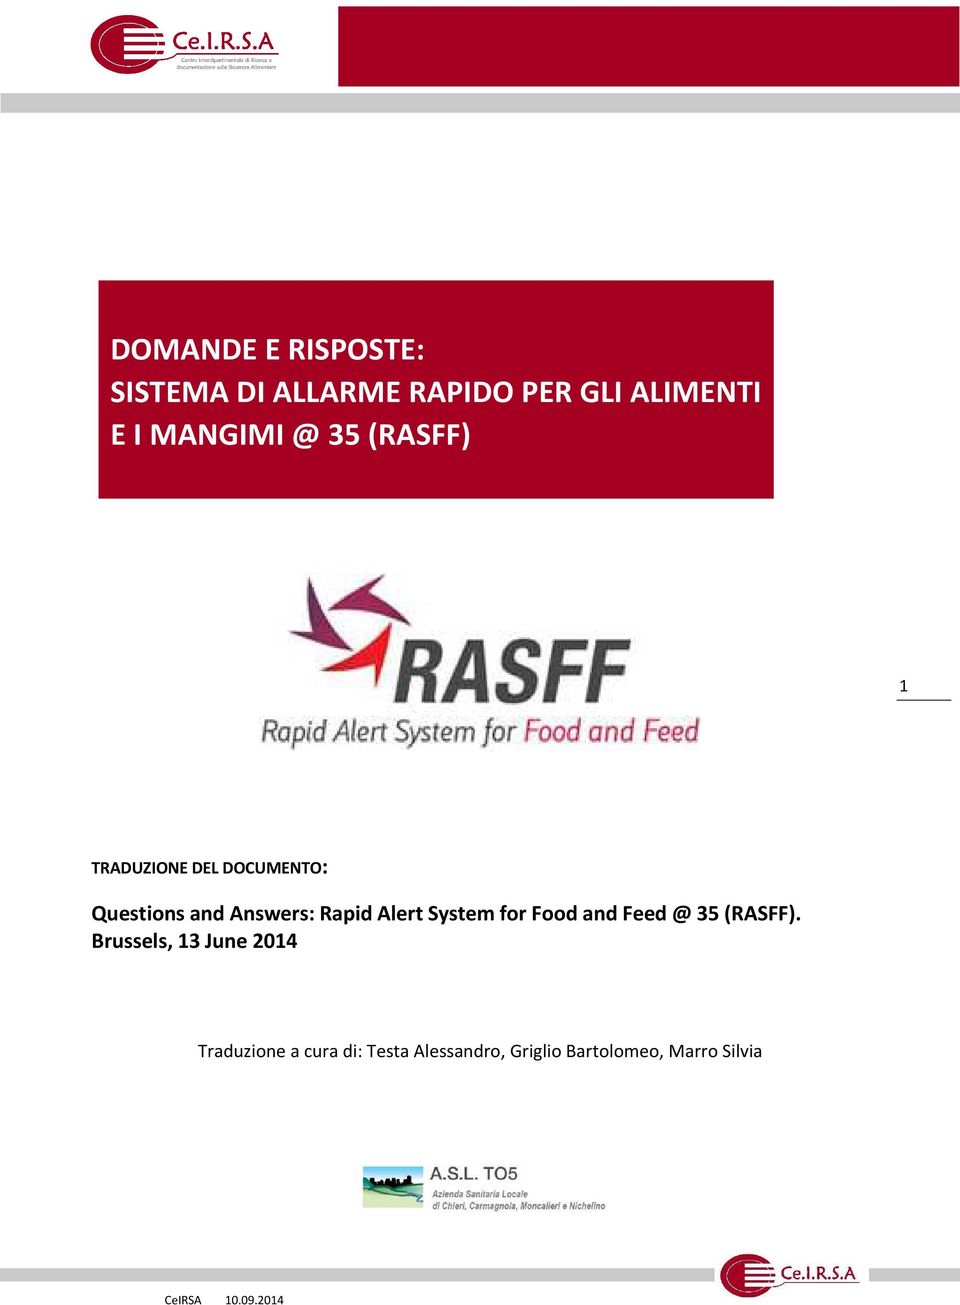 Rapid Alert System for Food and Feed @ 35 (RASFF).